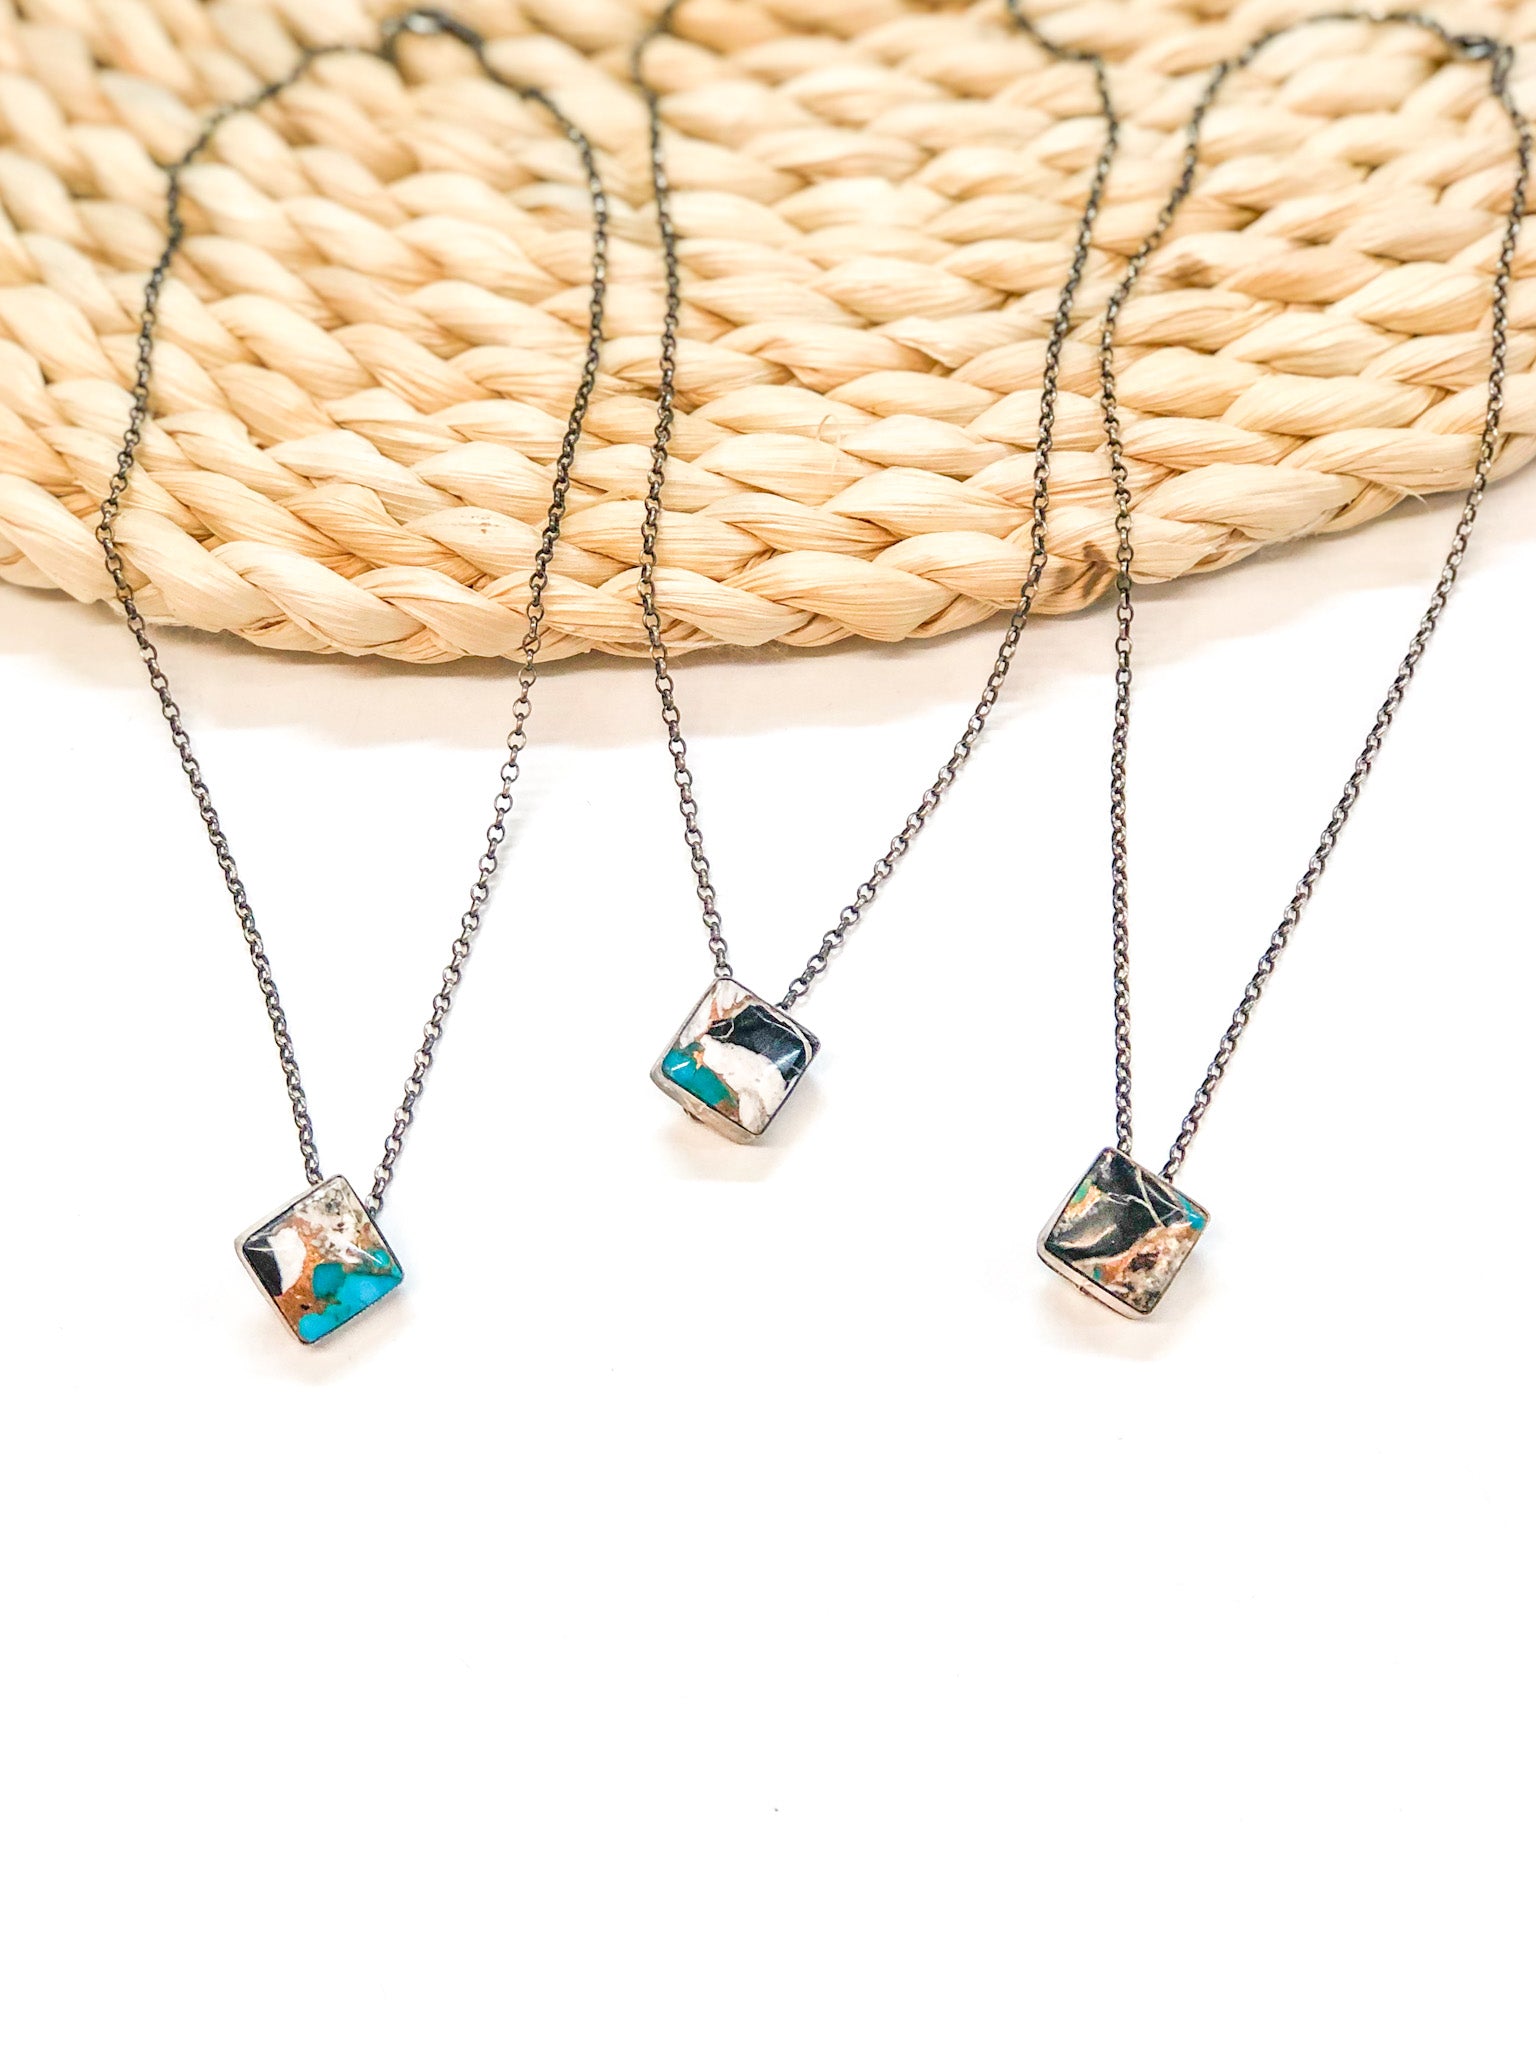 Vernon Kee | Navajo Handmade Sterling Silver Chain Necklace with White Buffalo, Turquoise, and Black Mix Square Pendant - Giddy Up Glamour Boutique